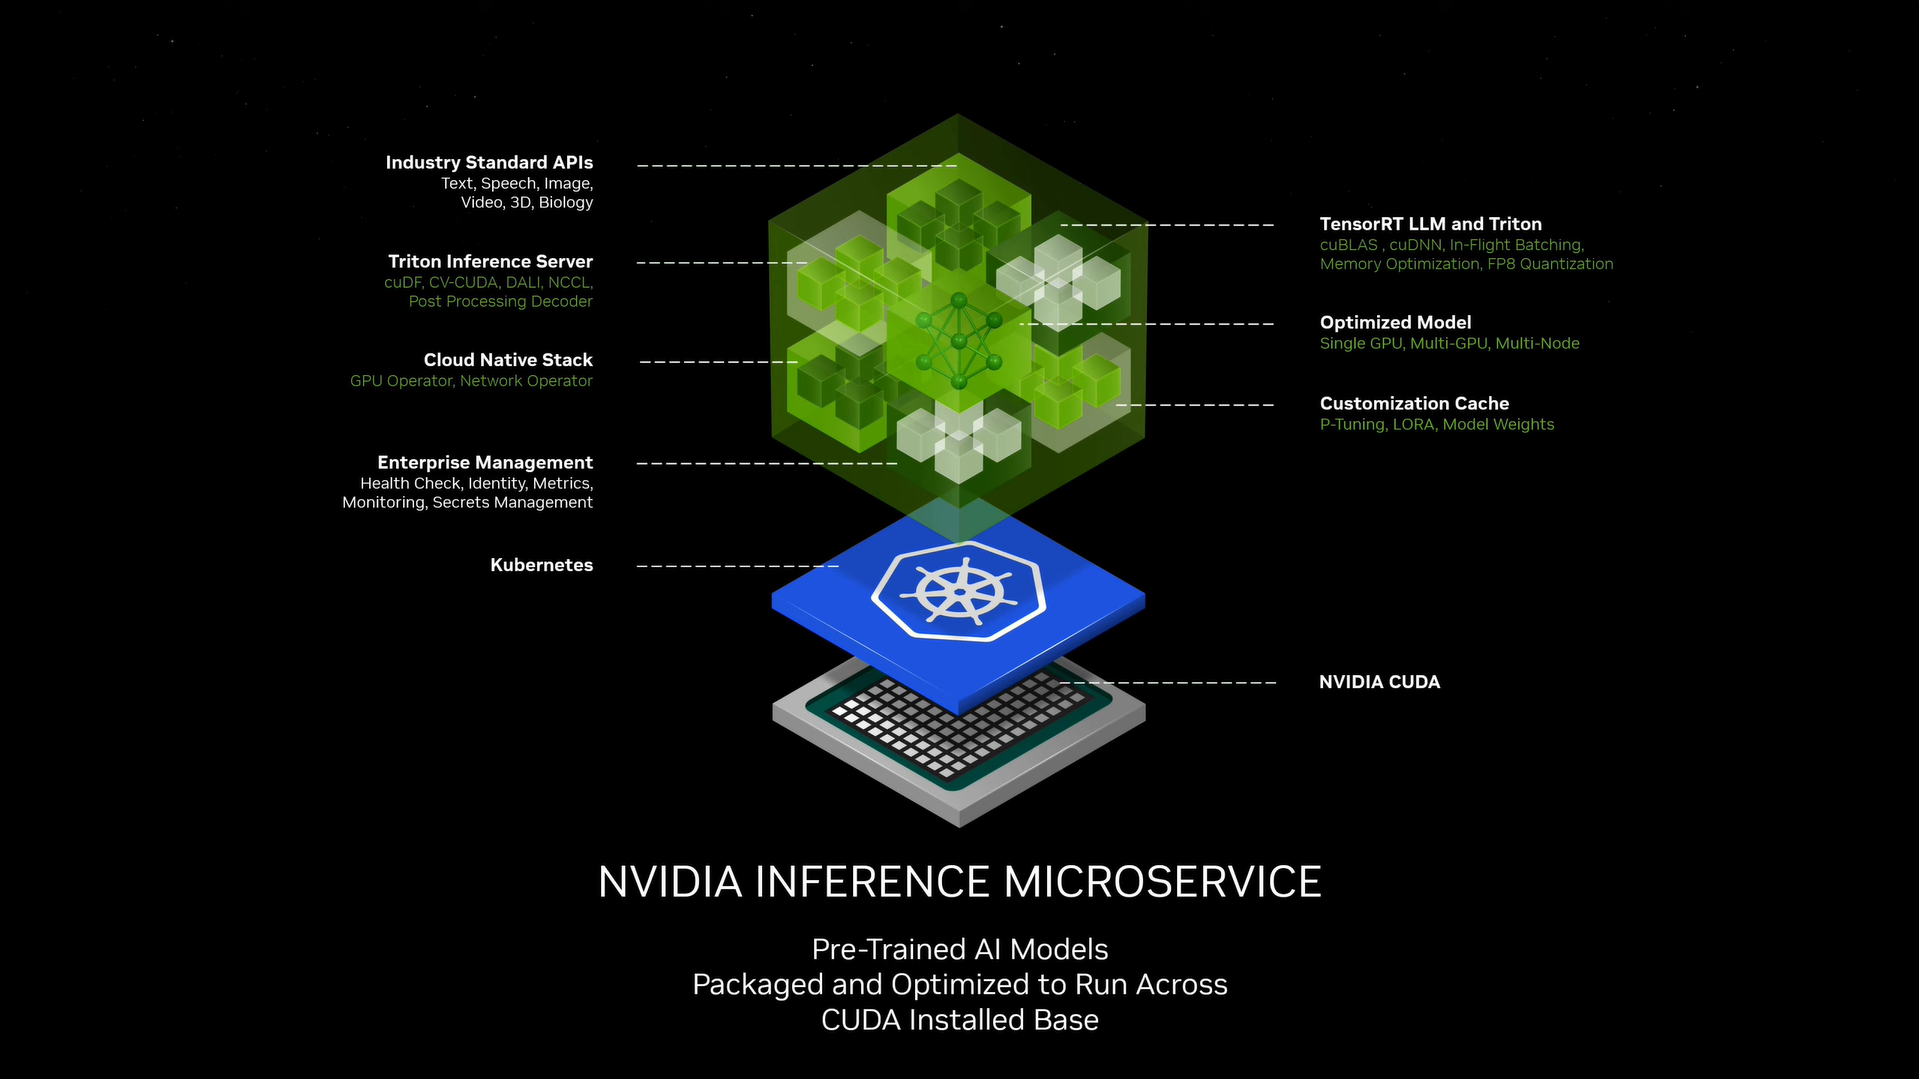 NVIDIA Inference Microservice - NIMs